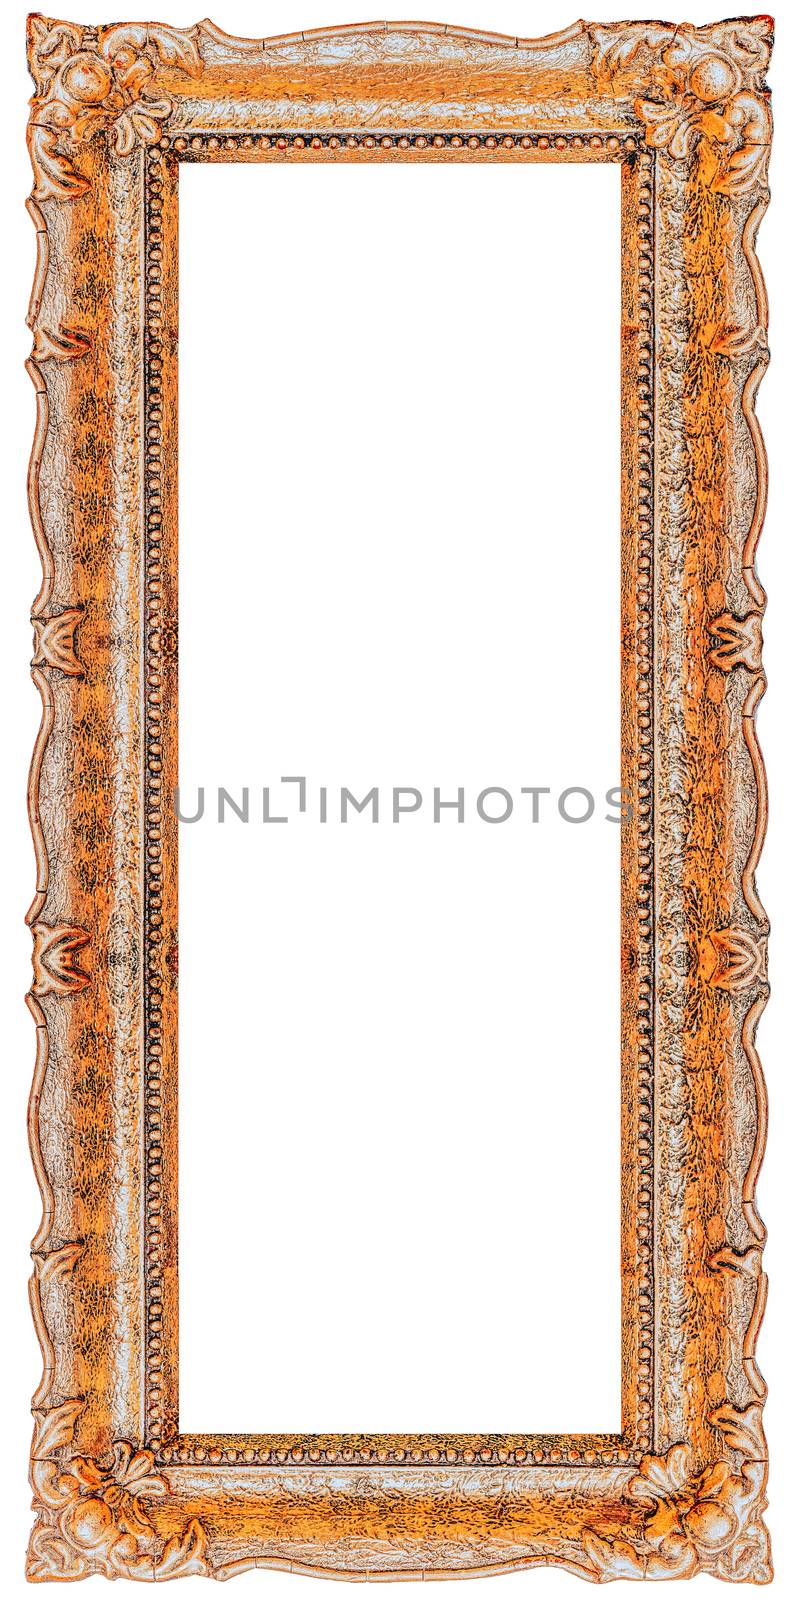 Verry Wide Vertical Big Old Picture Frame With Empty Copy Space - Stock image - design element - 40mpx